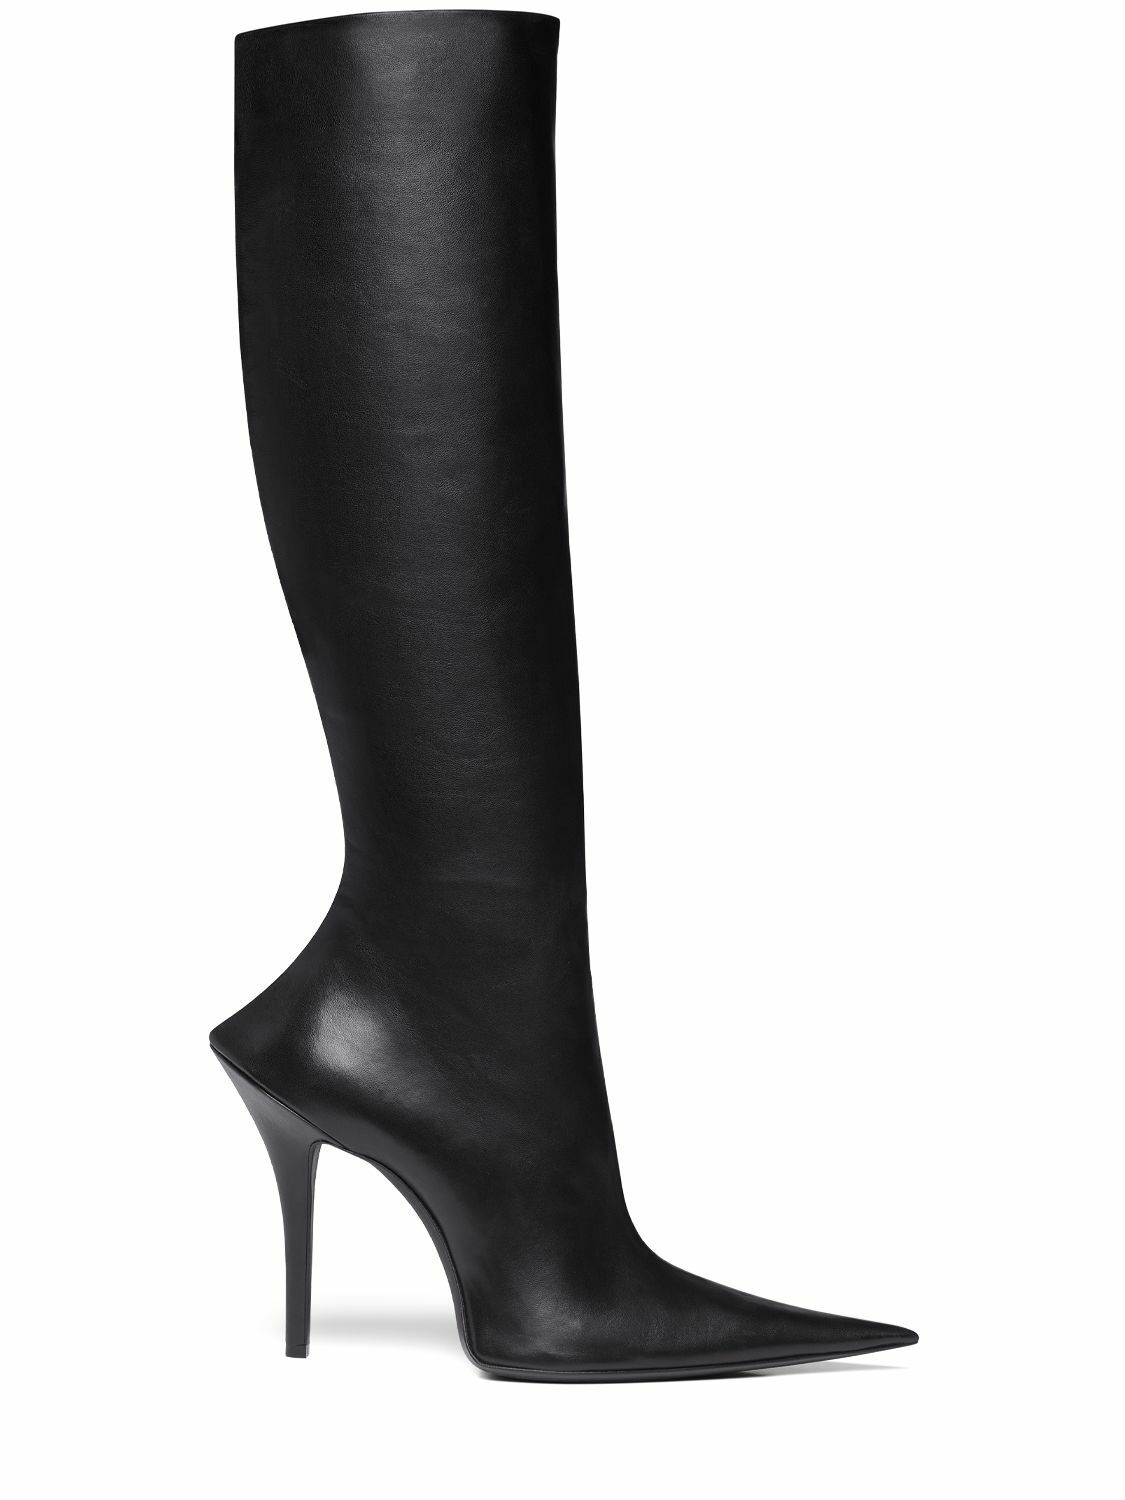 Photo: BALENCIAGA - 110mm Witch Leather Boots